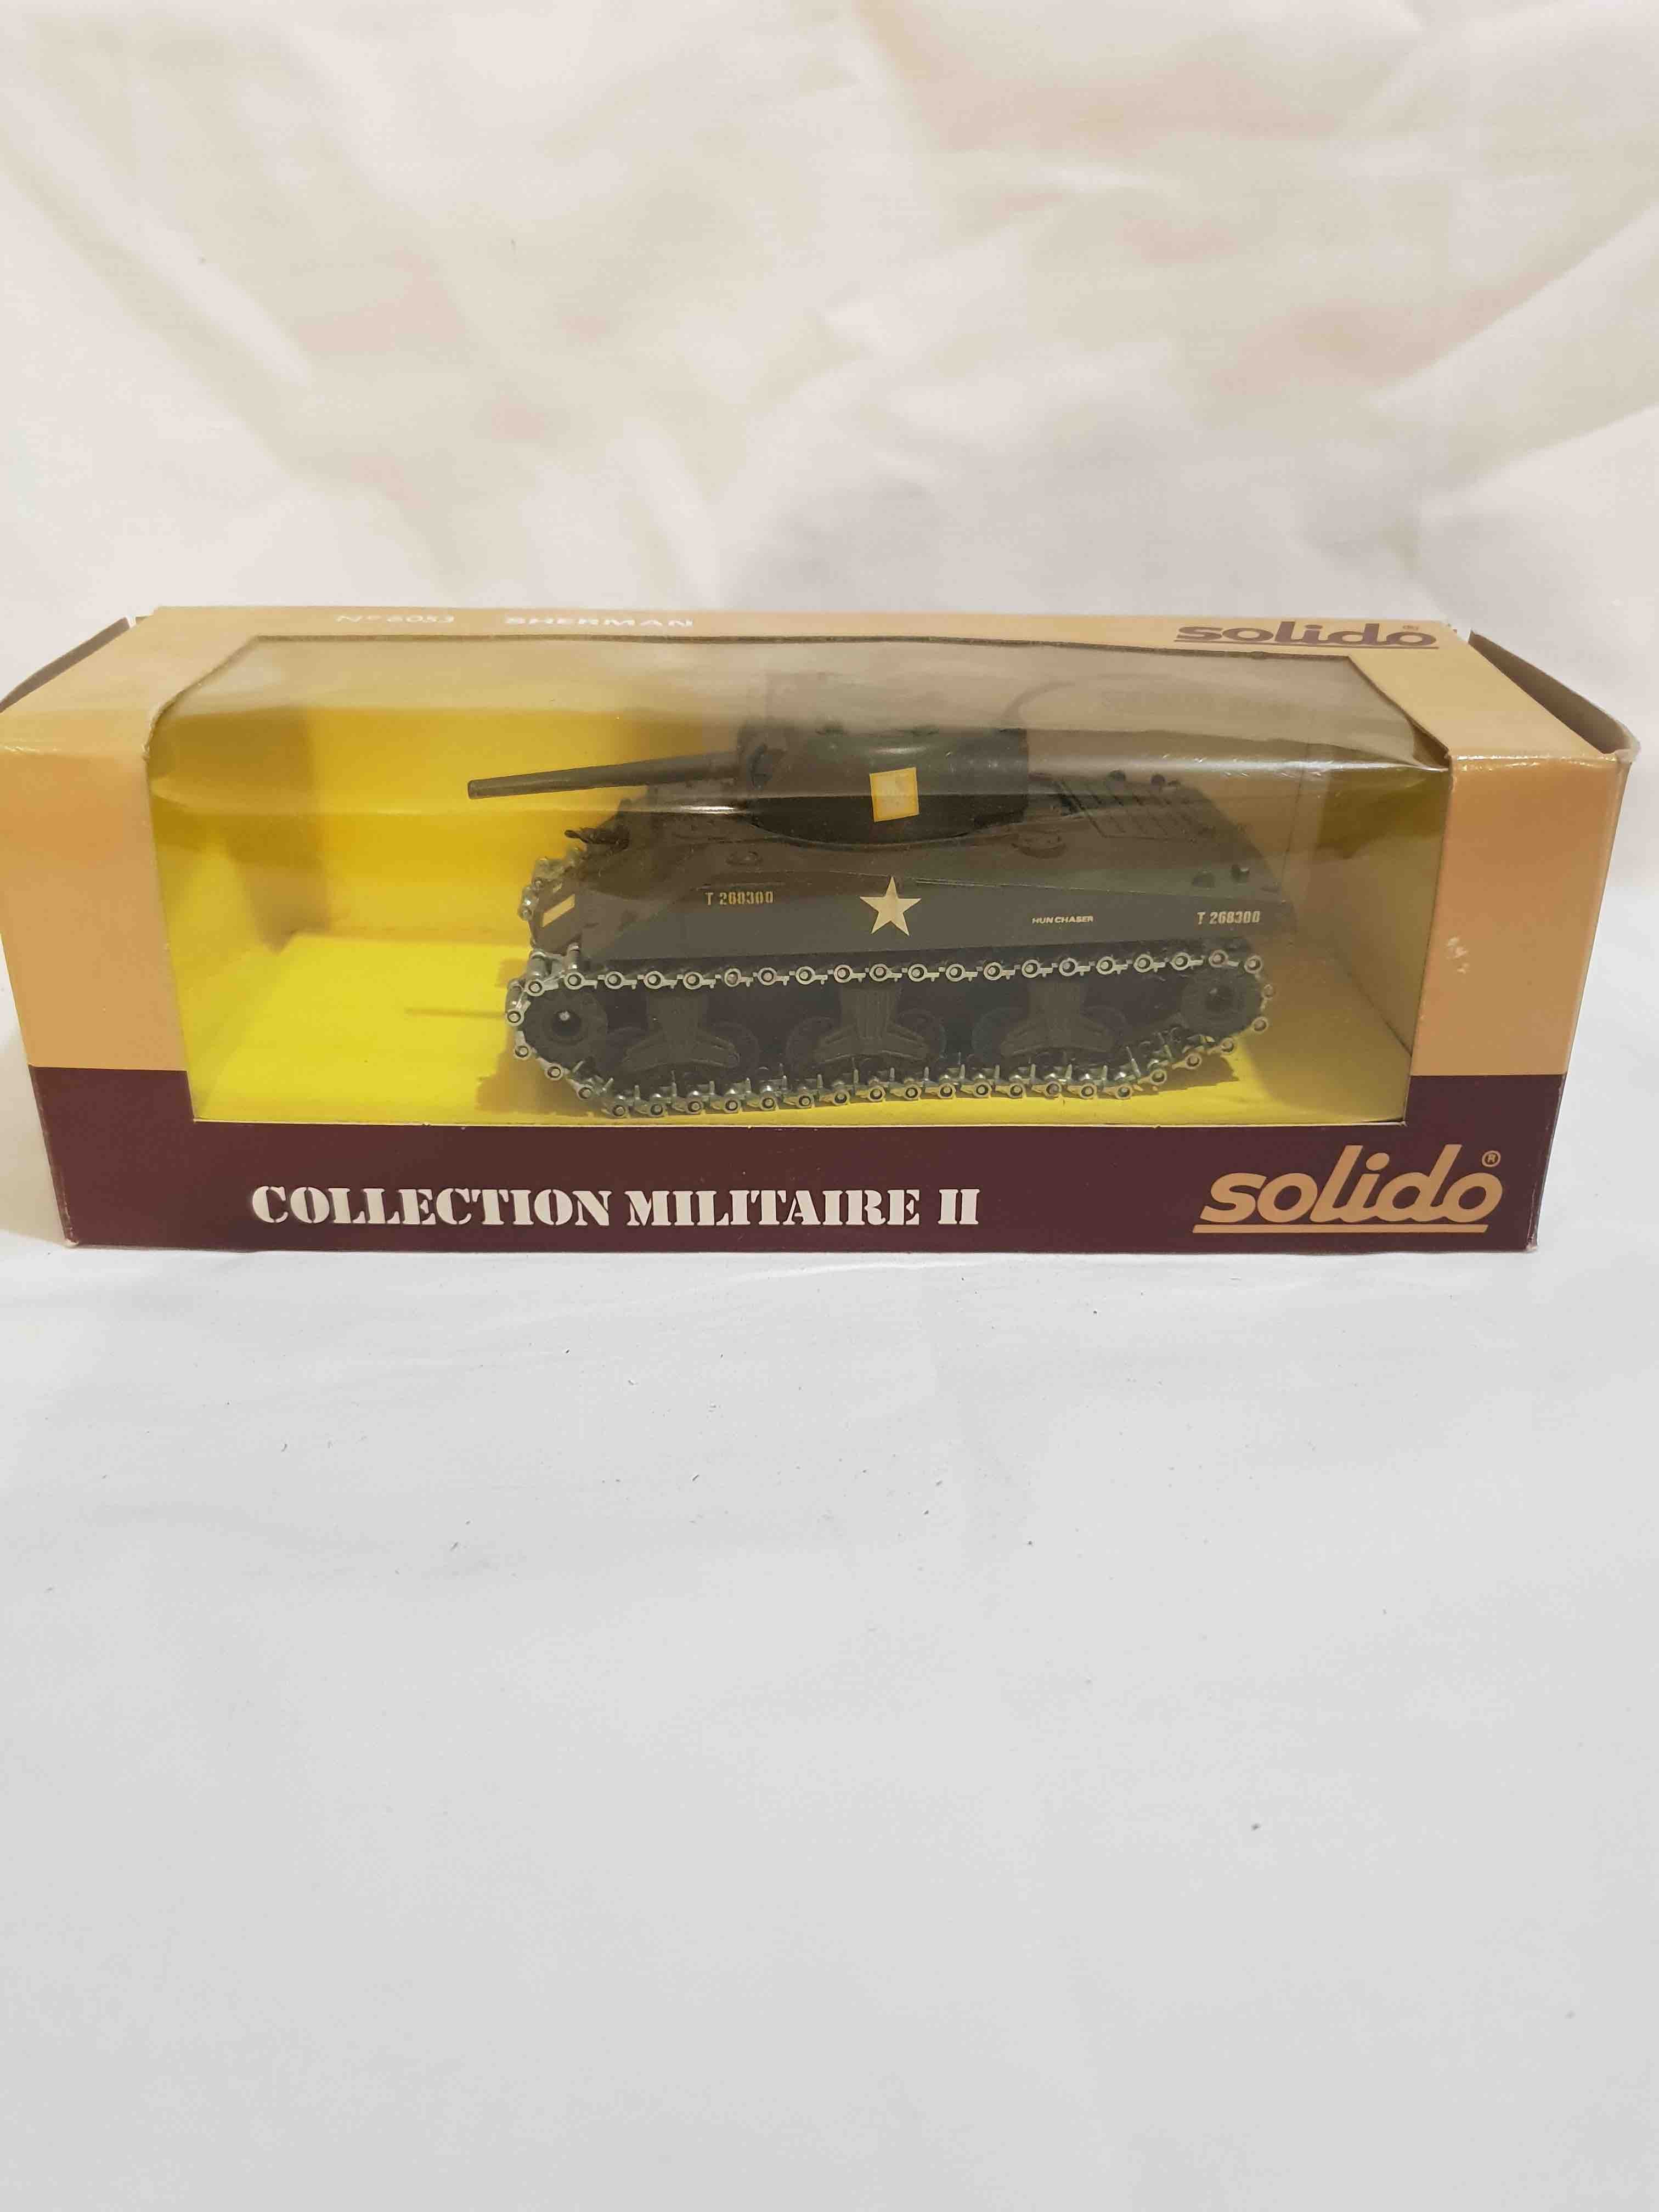 SOLIDO 6053 SHERMAN COLLECTION MILITAIRE